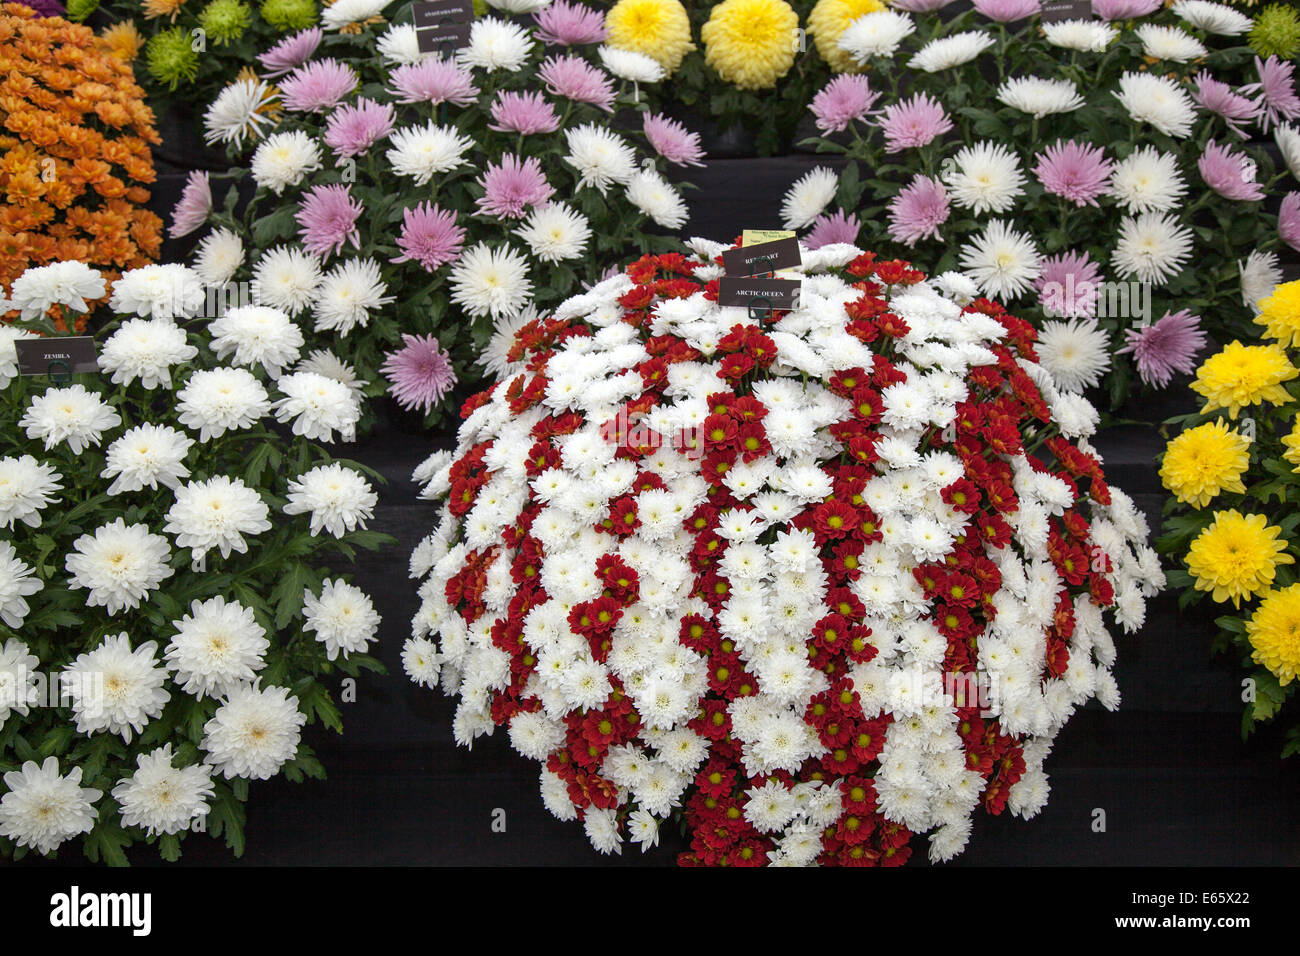 Southport, Merseyside, UK.  15th August, 2014.   Challenge Tropy winnner Frank Chartlons arrangements of  Chrysanthemums; bouquets of flowers at Britain’s biggest independent flower show. Stock Photo